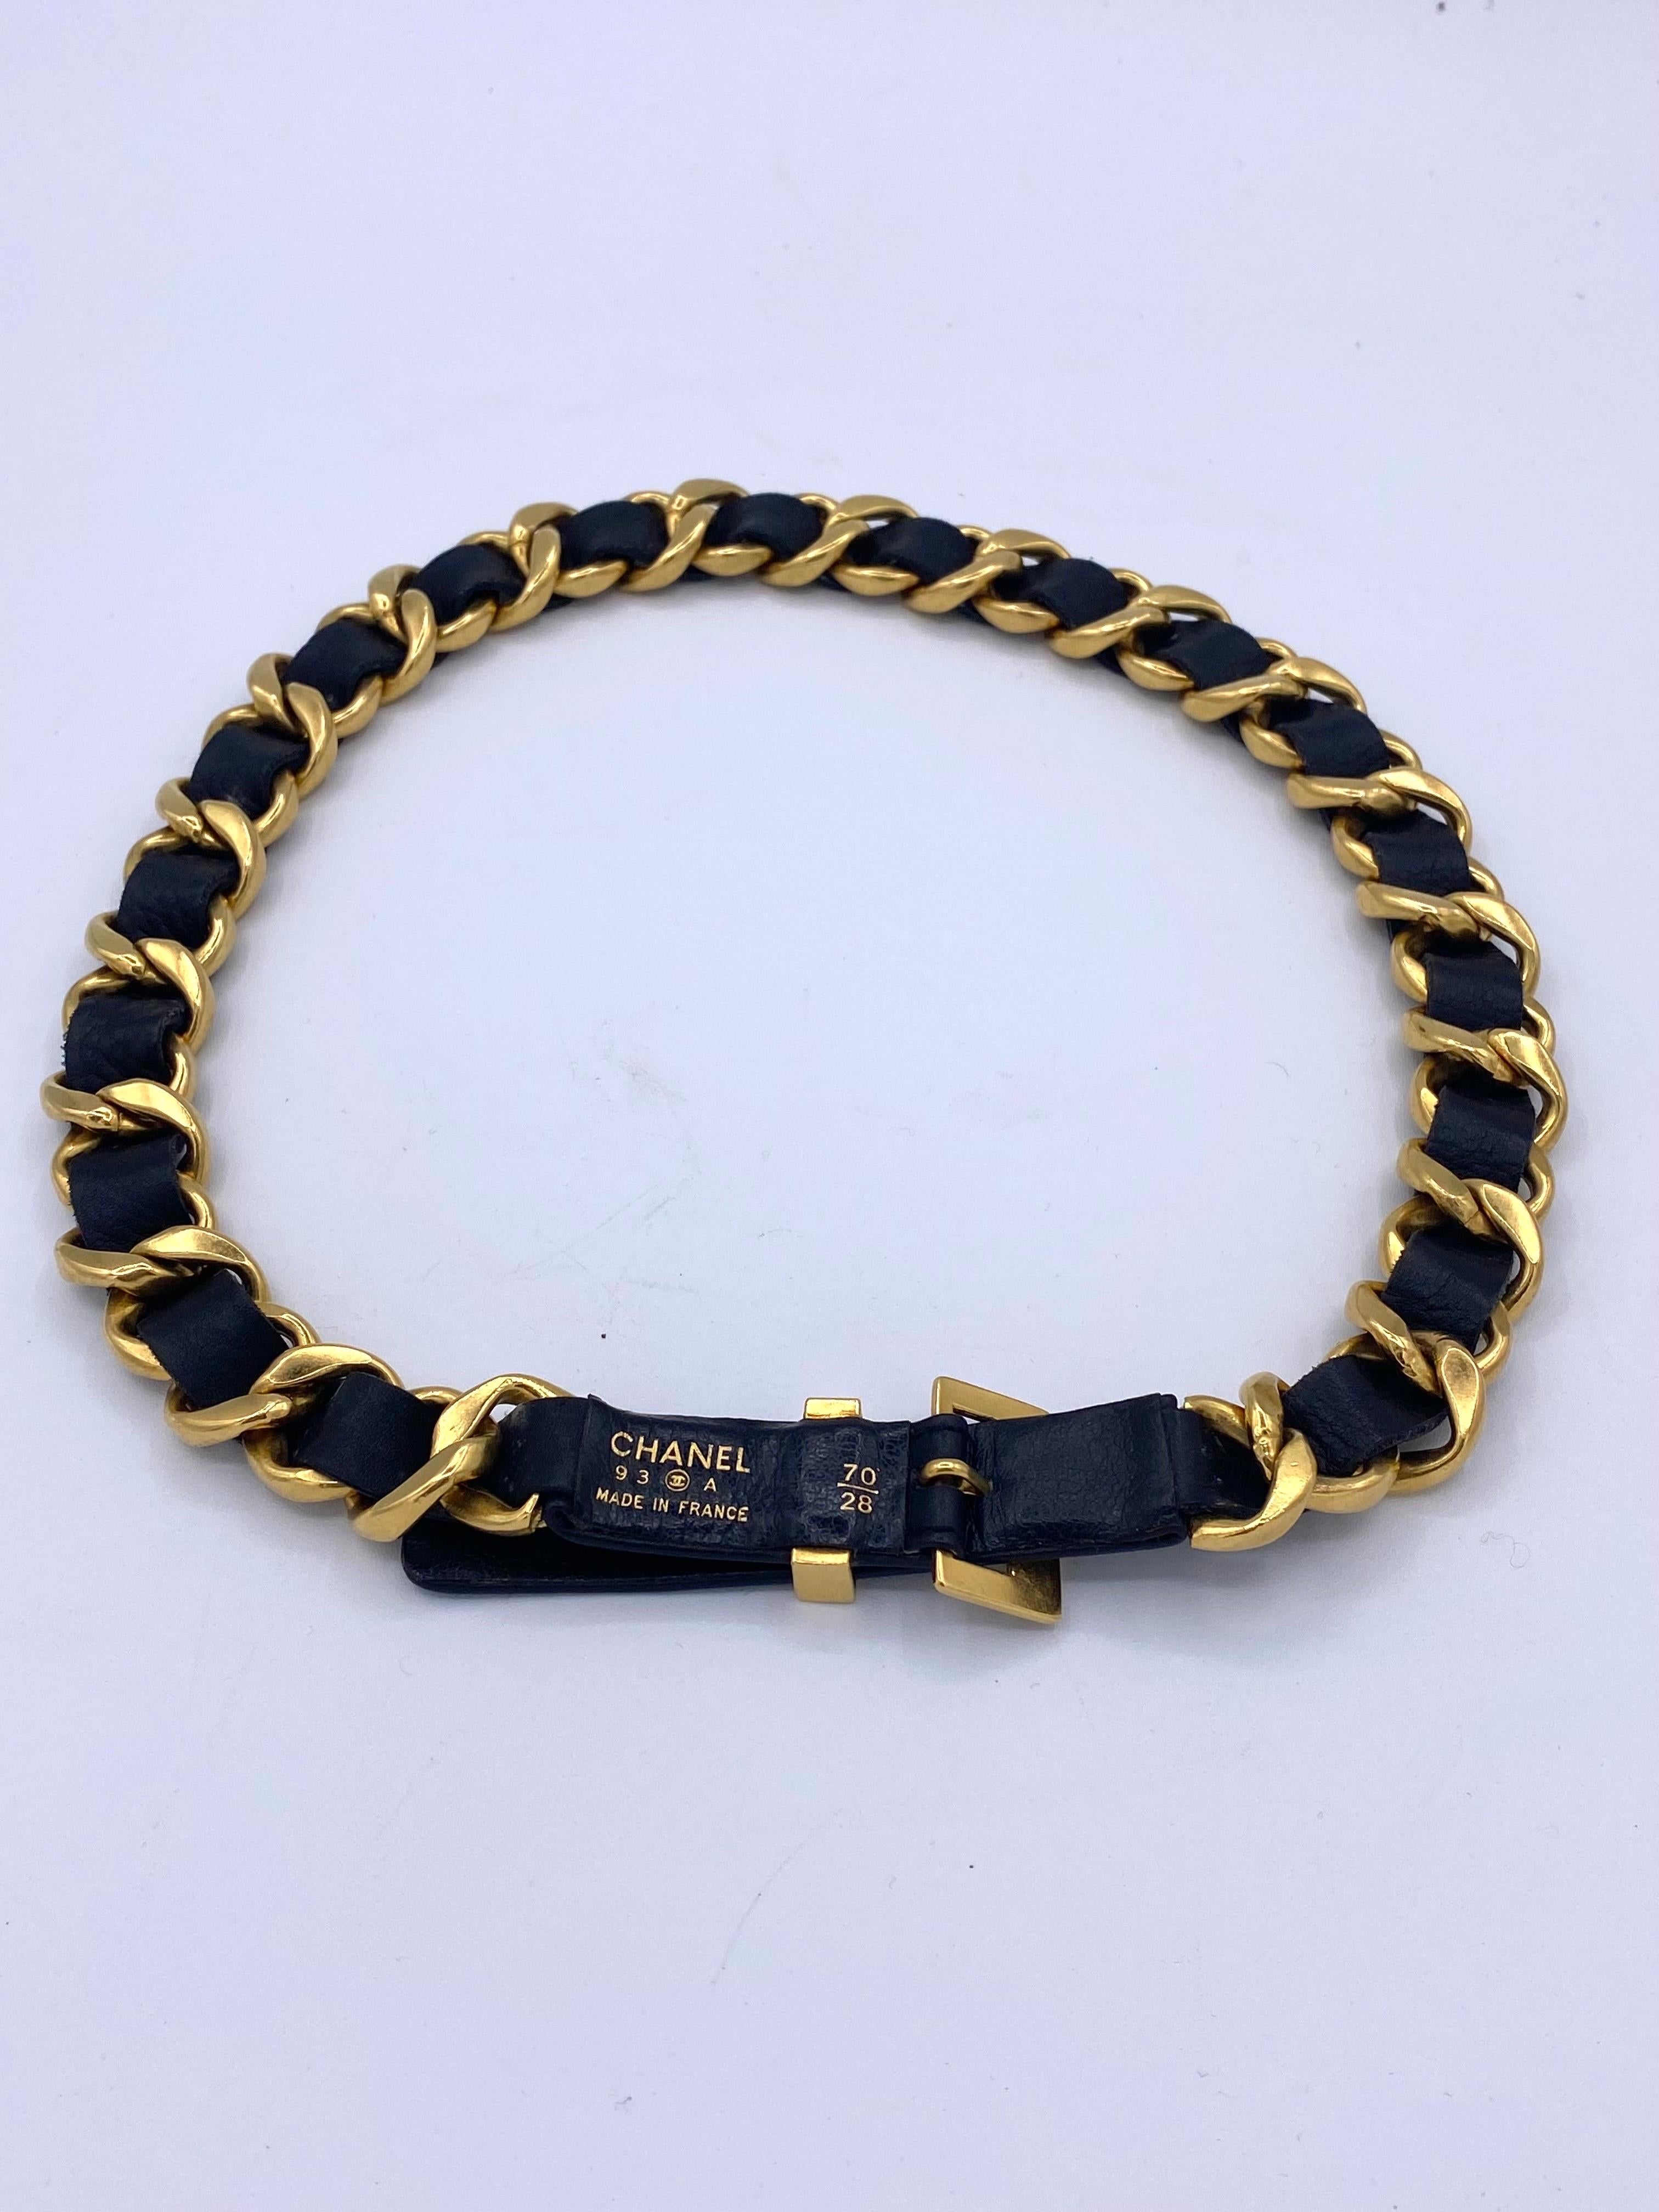 Chanel belt in golden chain interlaced with black leather from the 90s.
Stamped 93 A
Made in France
Adjustable buckle closure with 3 holes (69cm-71cm-73cm)
Chain width 2.2cm
delivered with the box.